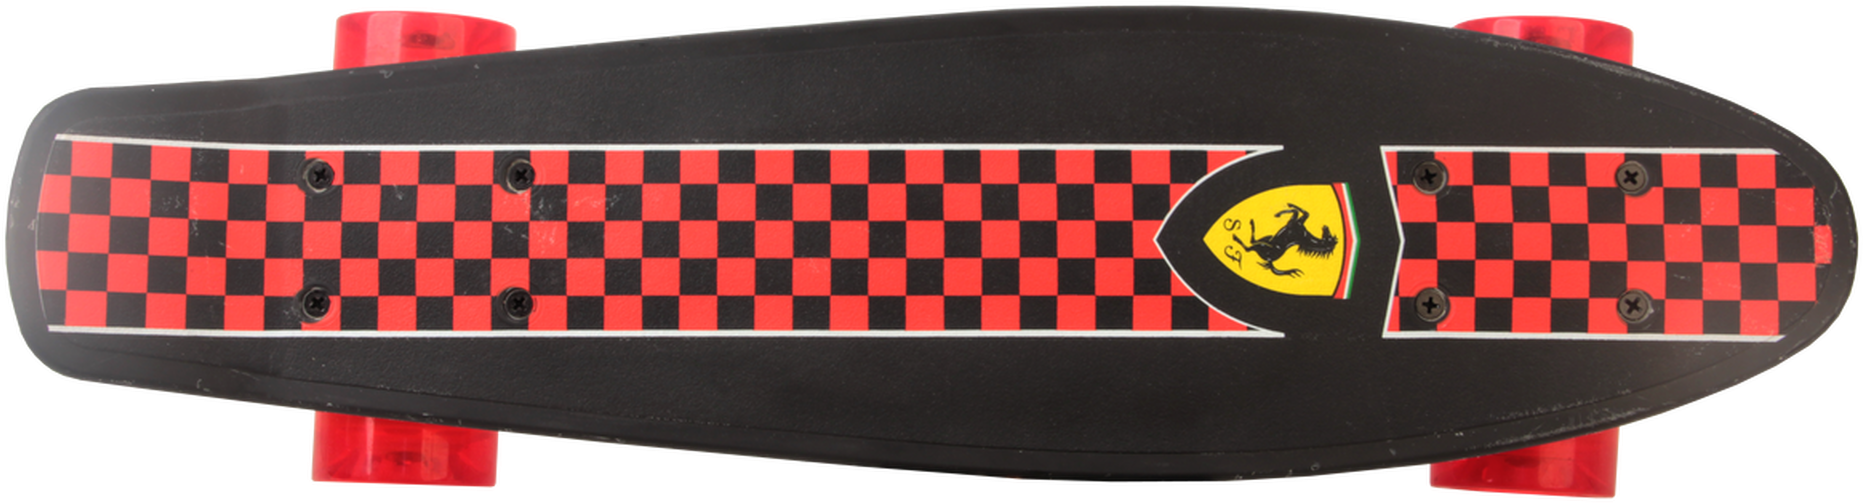 Checkered Penny Boardwith Red Wheels PNG image